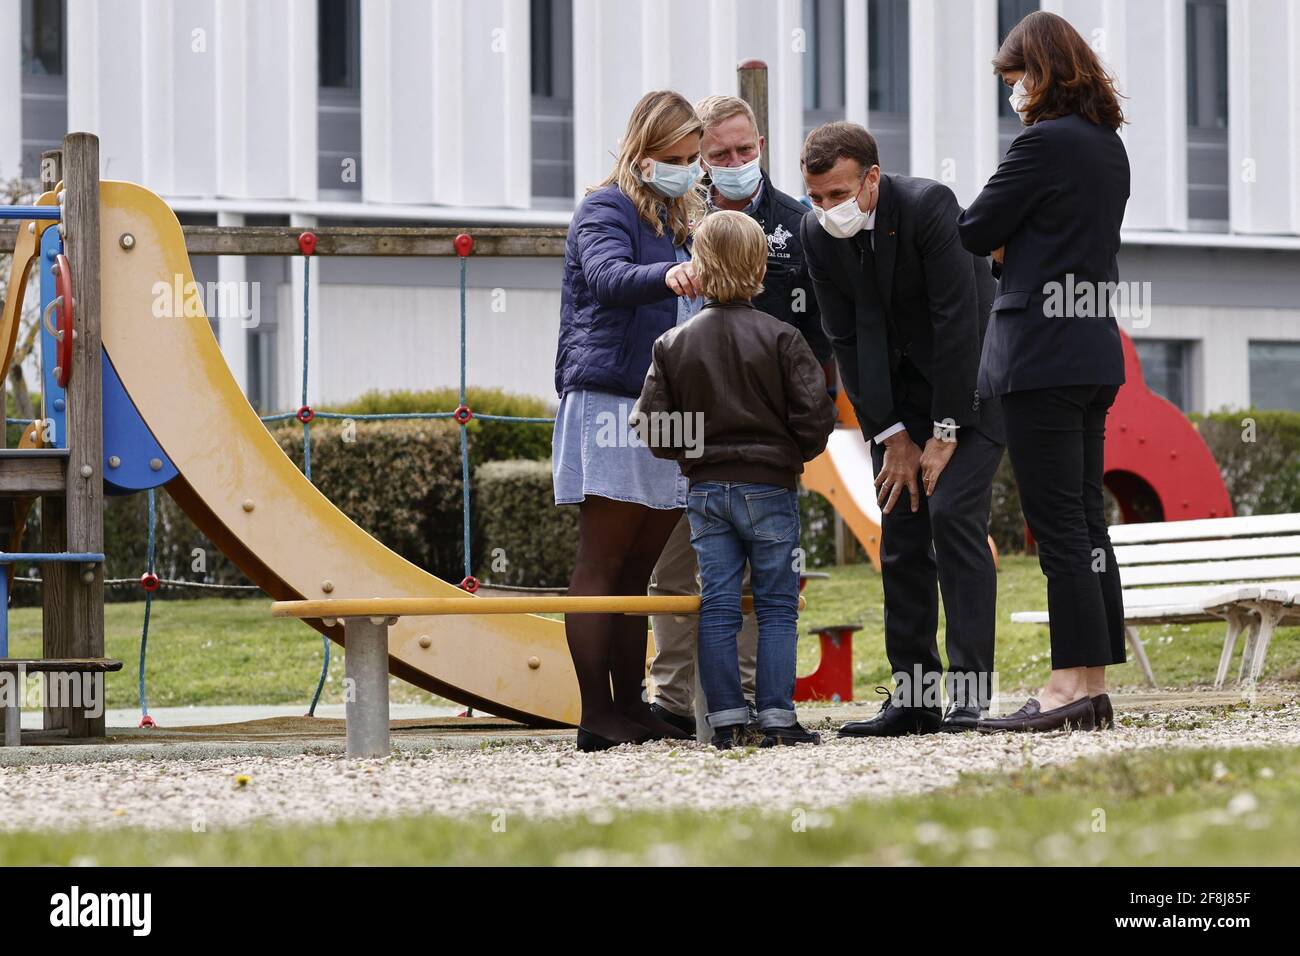 French President Emmanuel Macron talks to a child as he visits a child psychiatry department at Reims hospital to discuss the psychological impact of the COVID-19 crisis and the lockdown on children and teenagers in France, April 14, 2021. Photo by Christian Hartmann/Pool/ABACAPRESS.COM Stock Photo